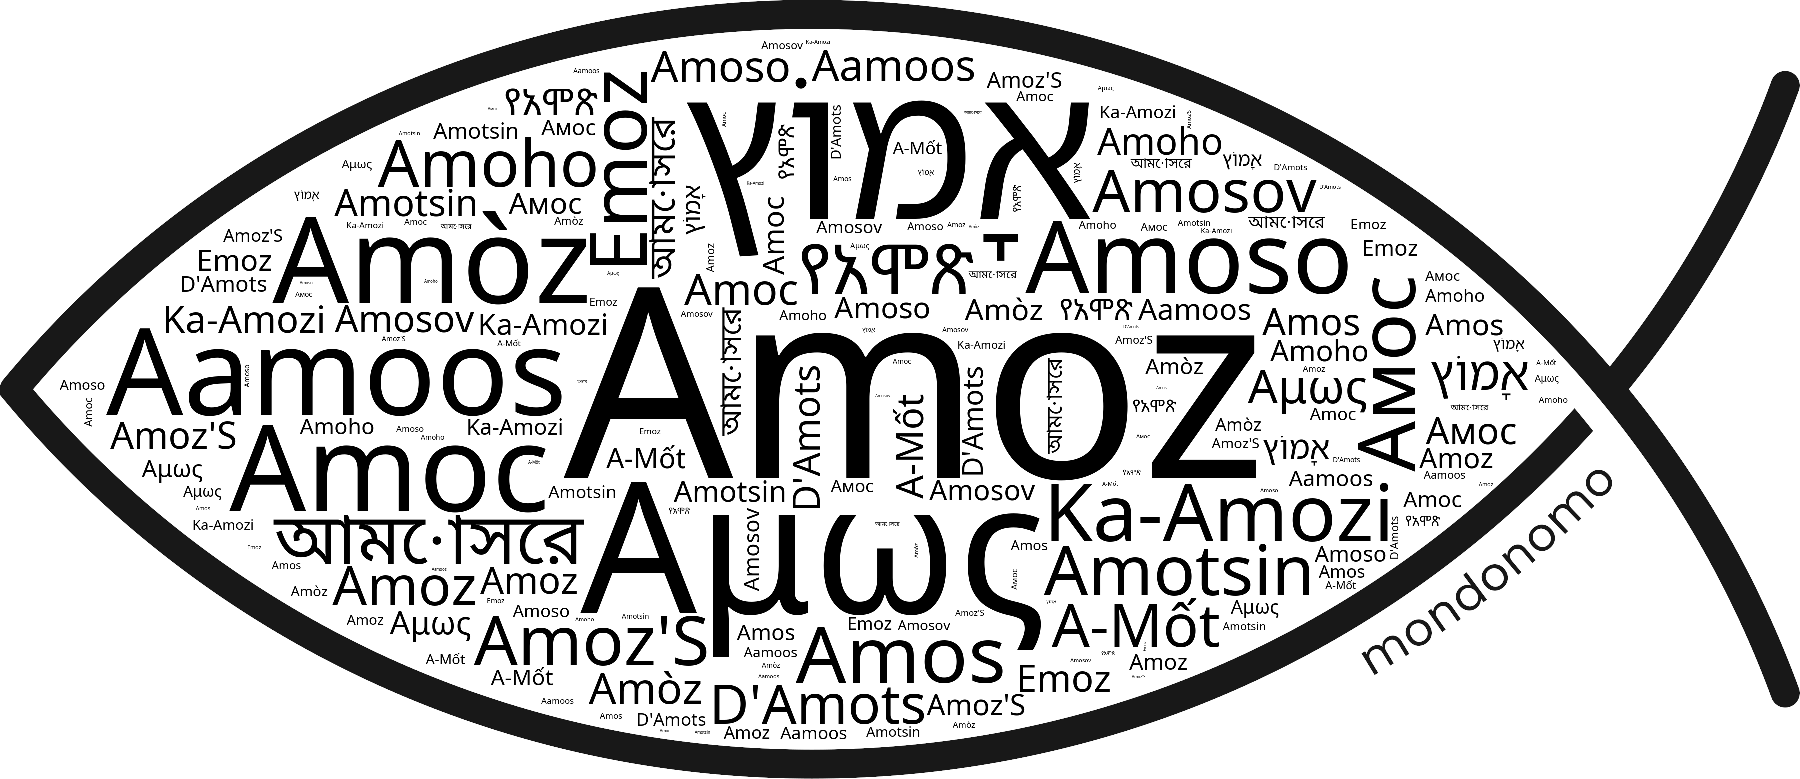 Name Amoz in the world's Bibles